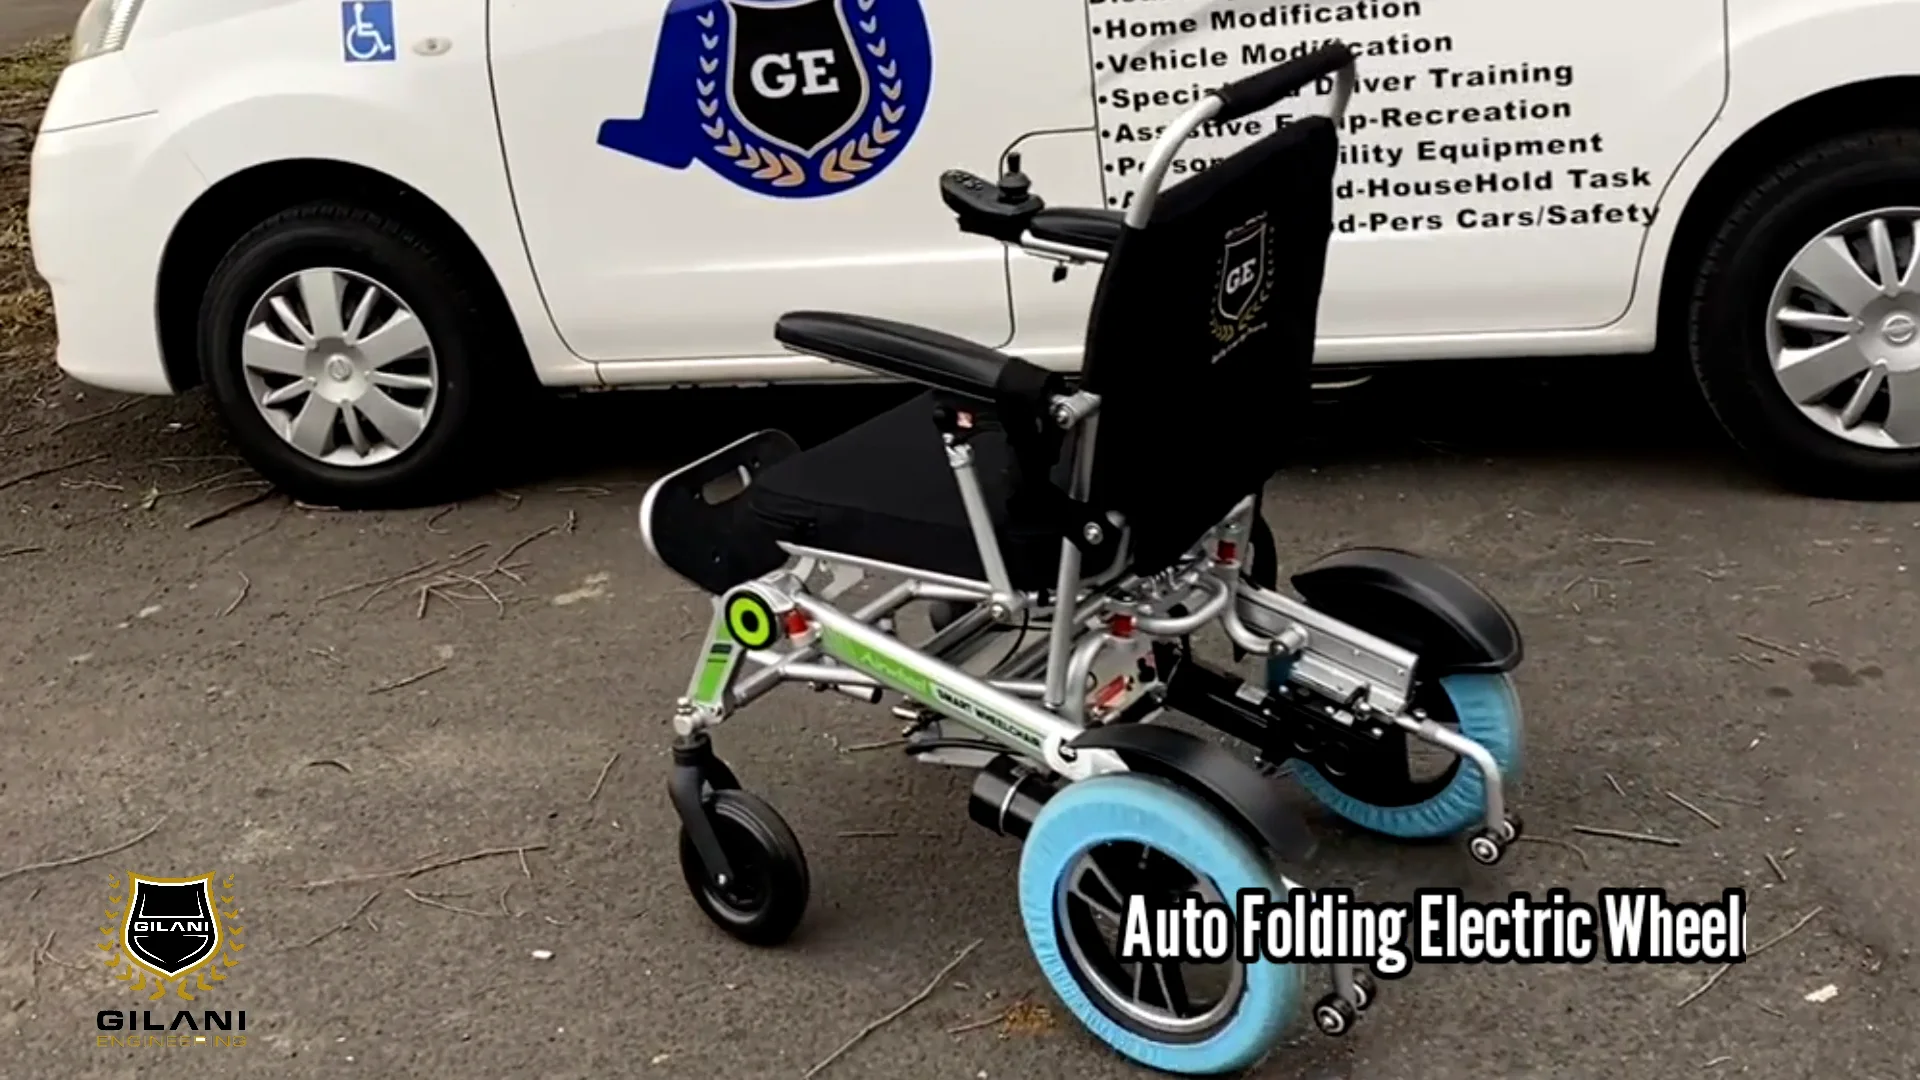 How to control your Airwheel electric wheelchair using your phone. on Vimeo